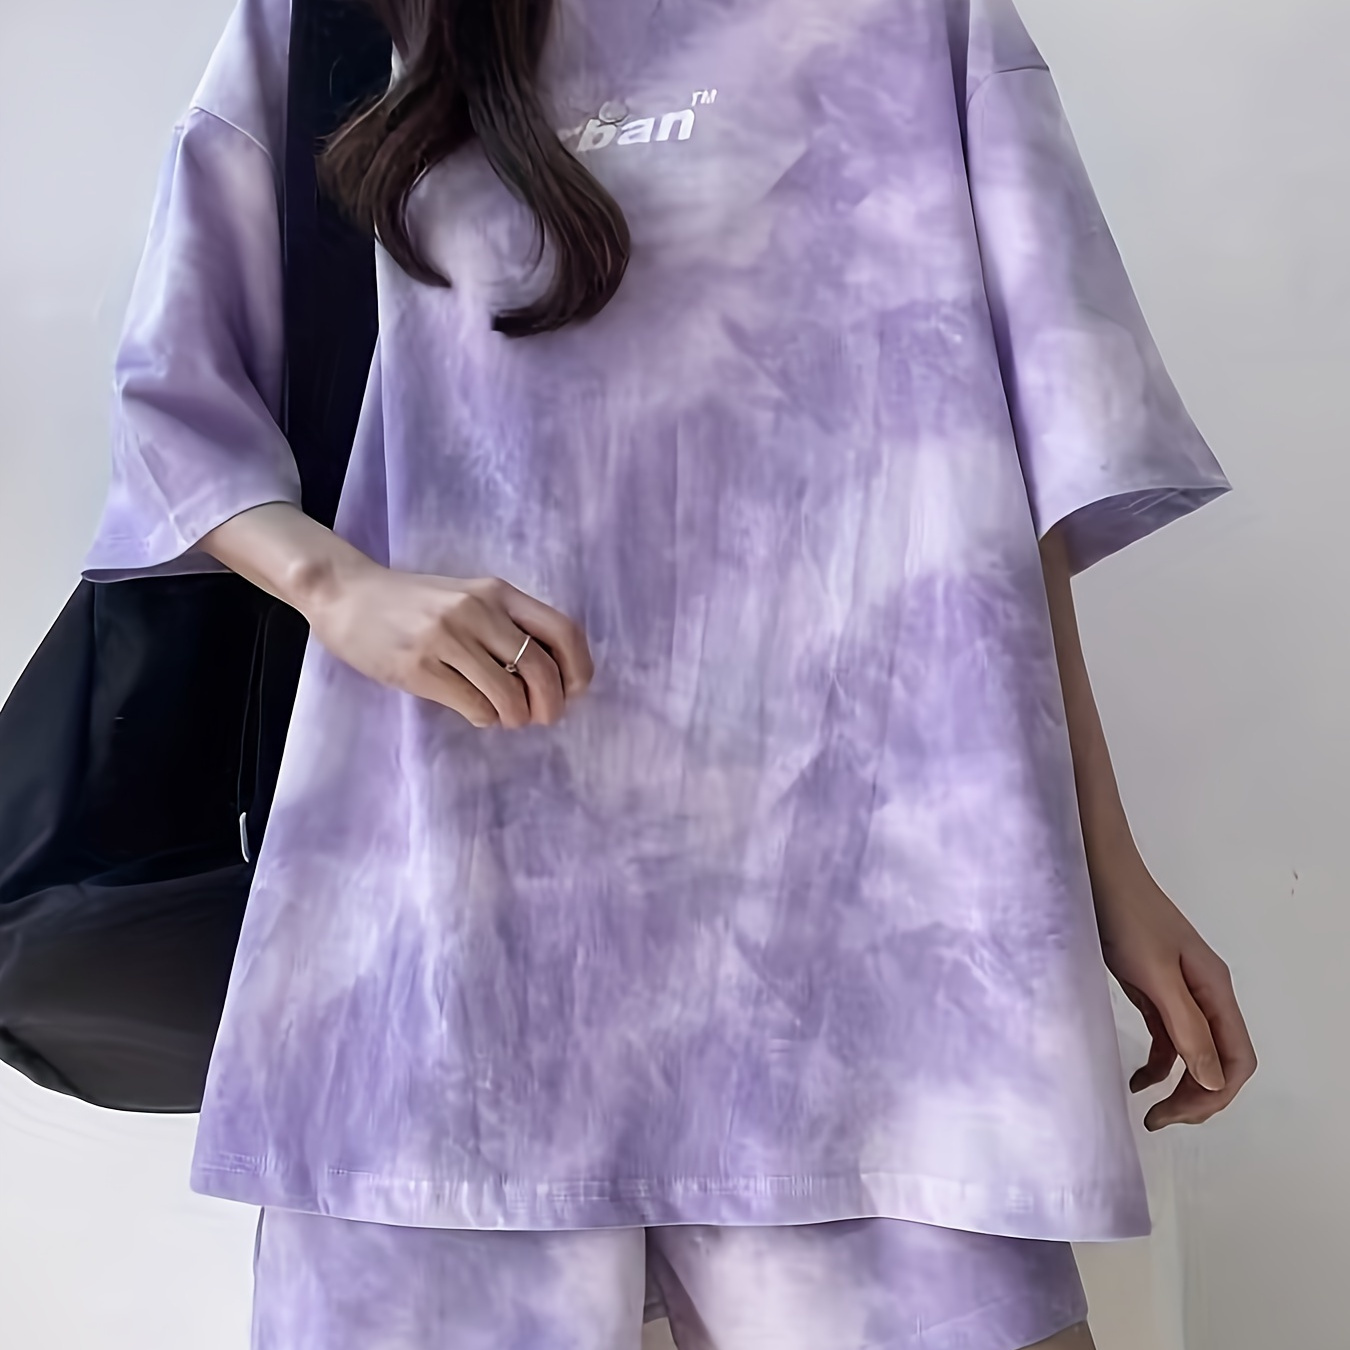 

2-piece Tie-dye & Letter Print Pajama Set For Women, Summer Short Sleeve Top And Shorts, Sporty Pajama Set